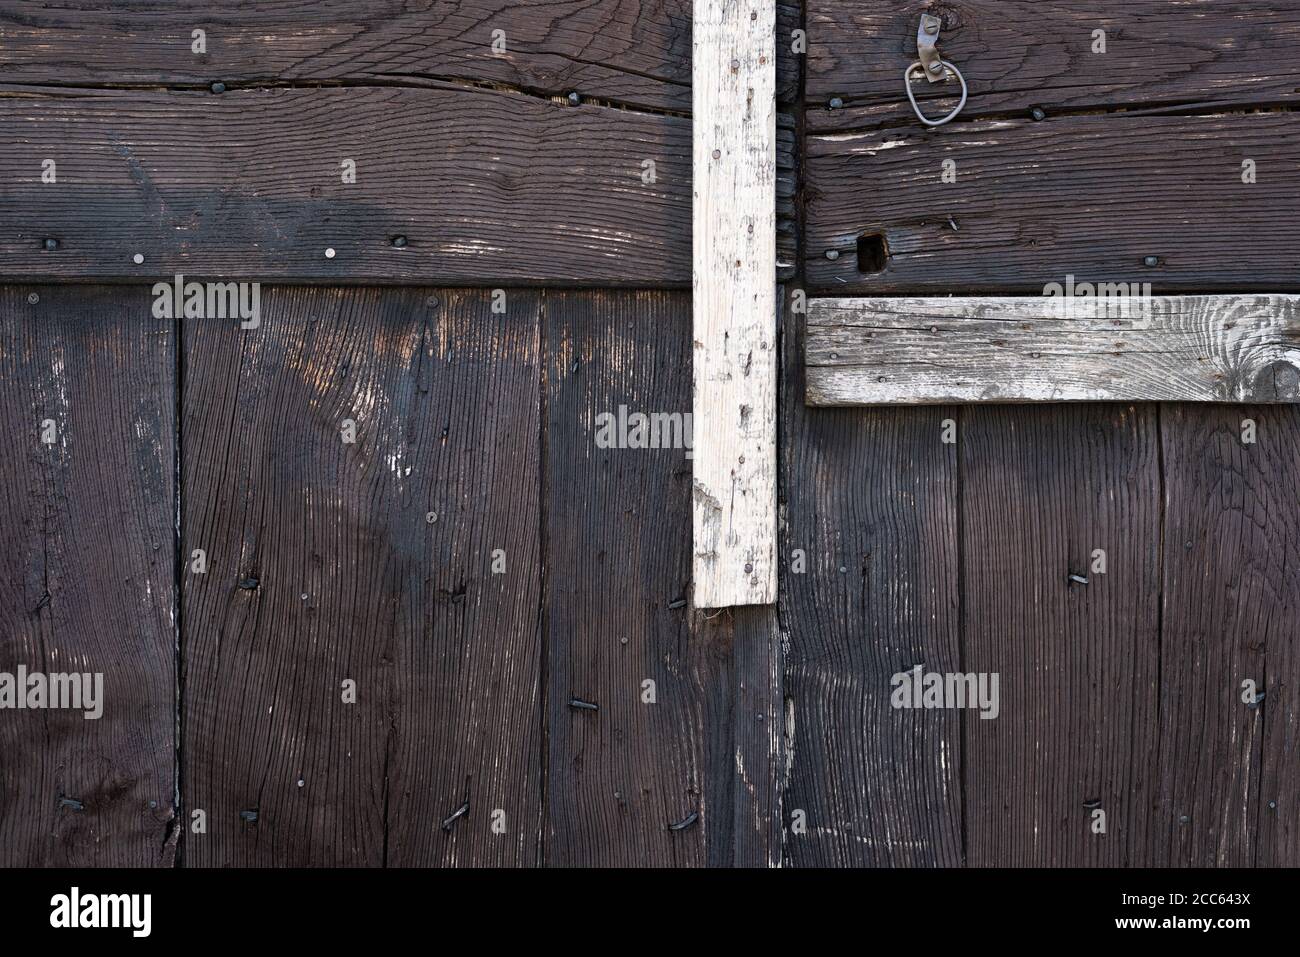 Wooden abstract background. Old door surface closeup image. Stock Photo